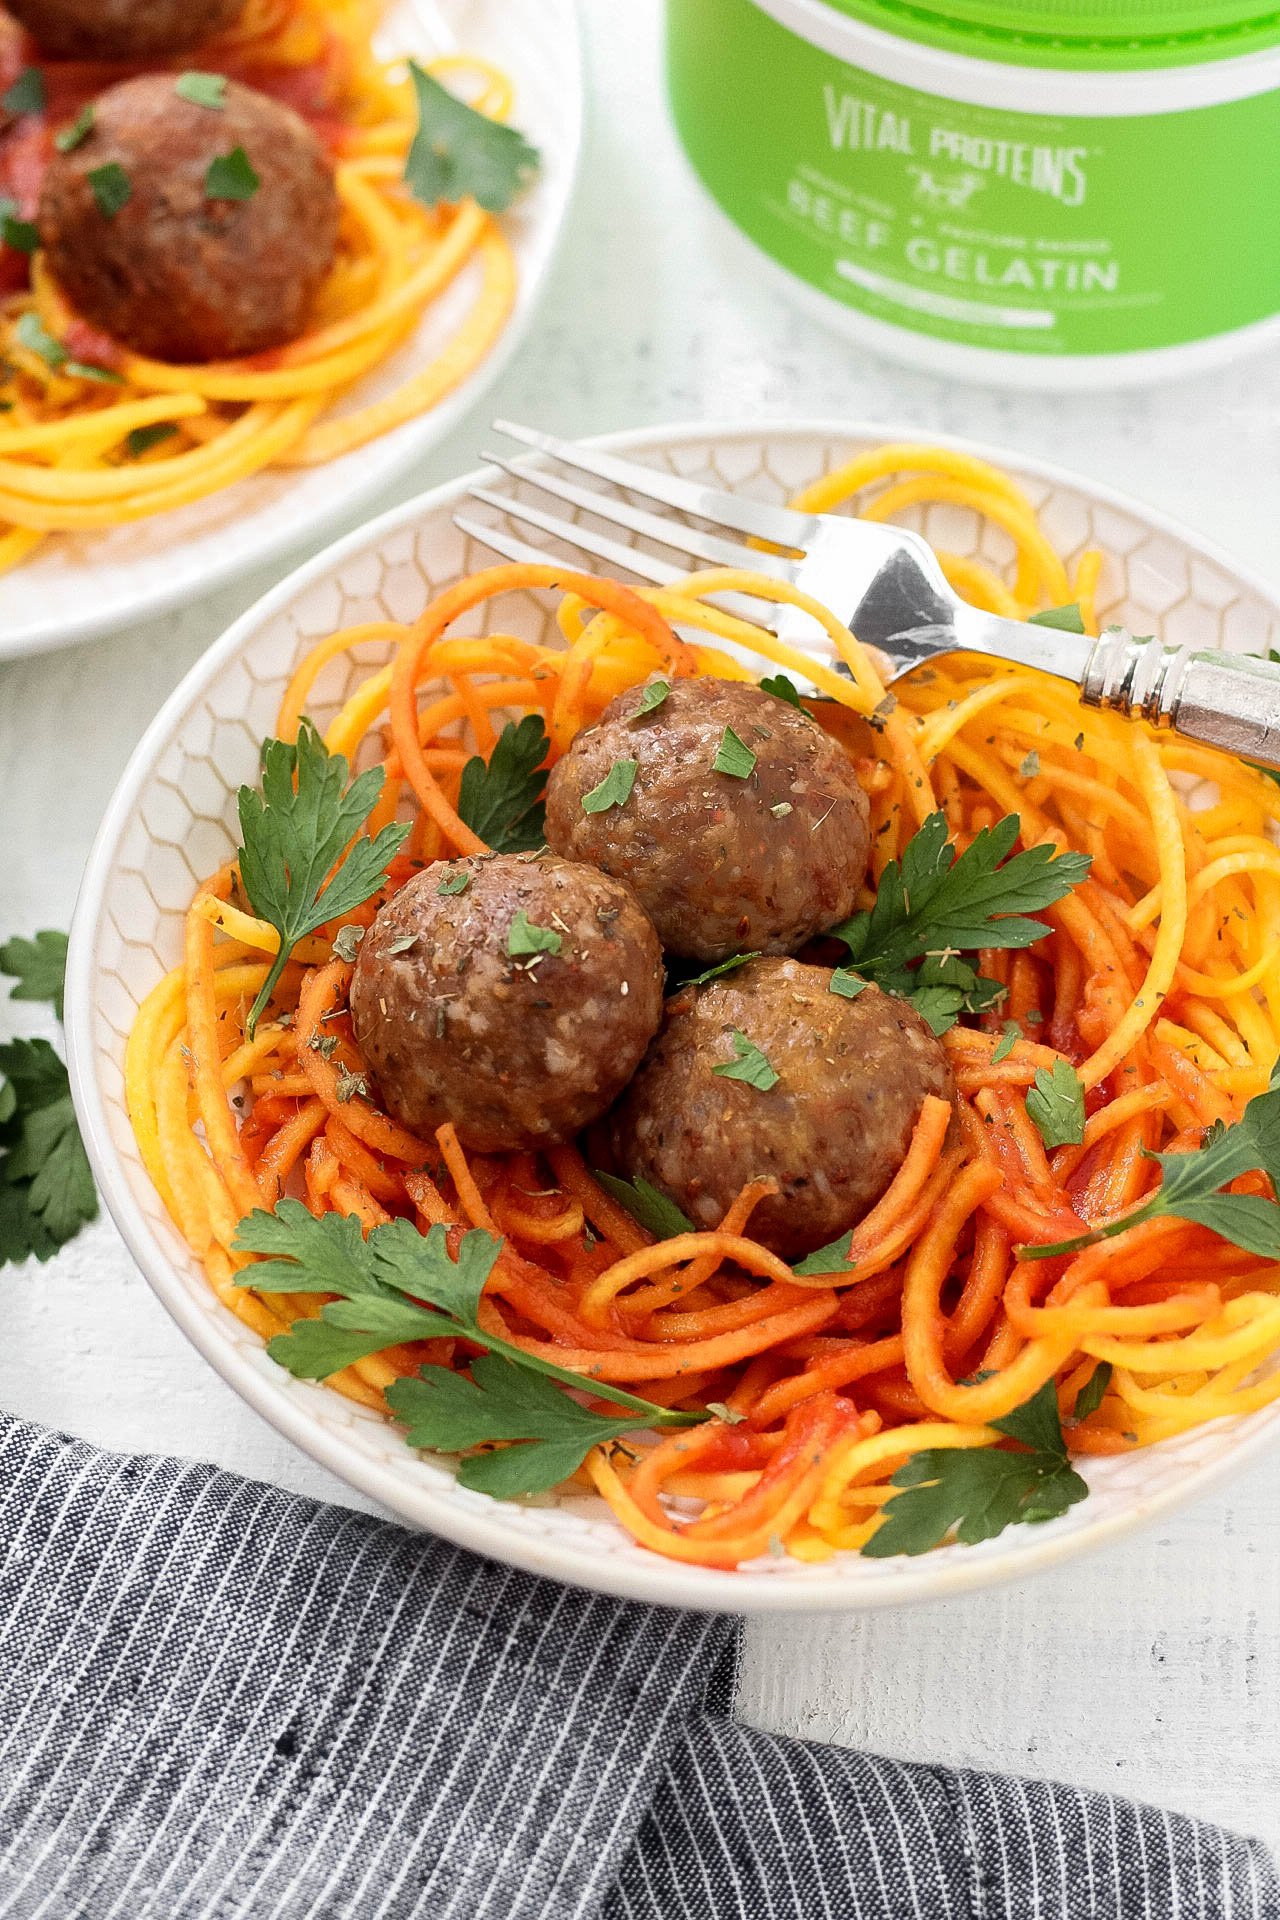 This easy meatball recipe is tried and true and the best way to make meatballs! Made paleo and Whole30 but still every bit as juicy and delicious. Served over butternut squash noodles and marinara here, the ways you can enjoy this low carb meatball recipe is endless!